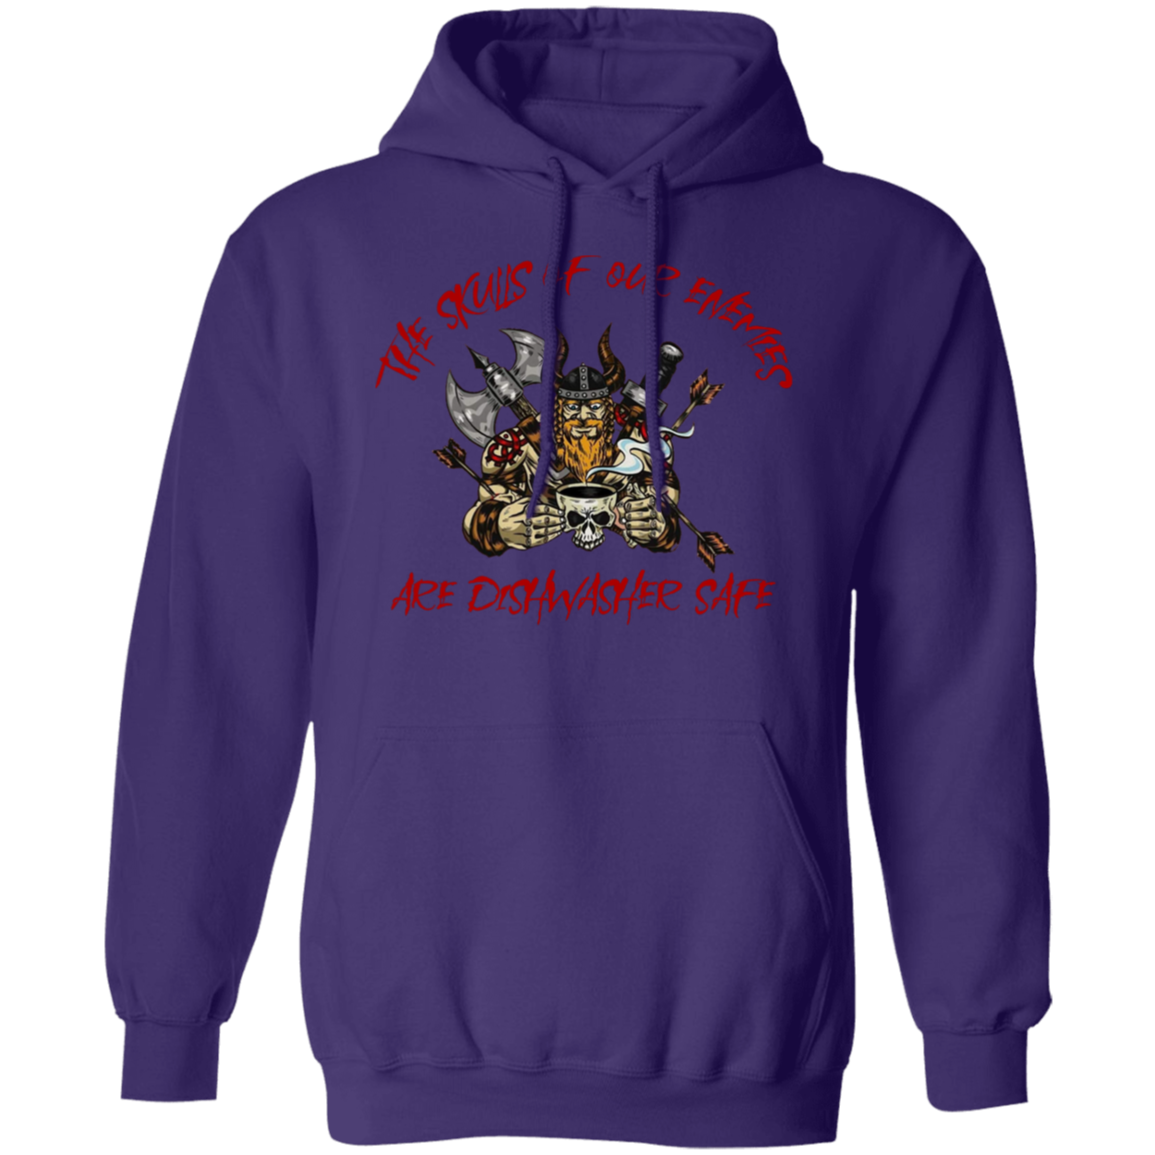 The Skulls of Our Enemies Are Dishwasher Safe Pullover Hoodie - Hoodies Purple / M Real Domain Streetwear Real Domain Streetwear